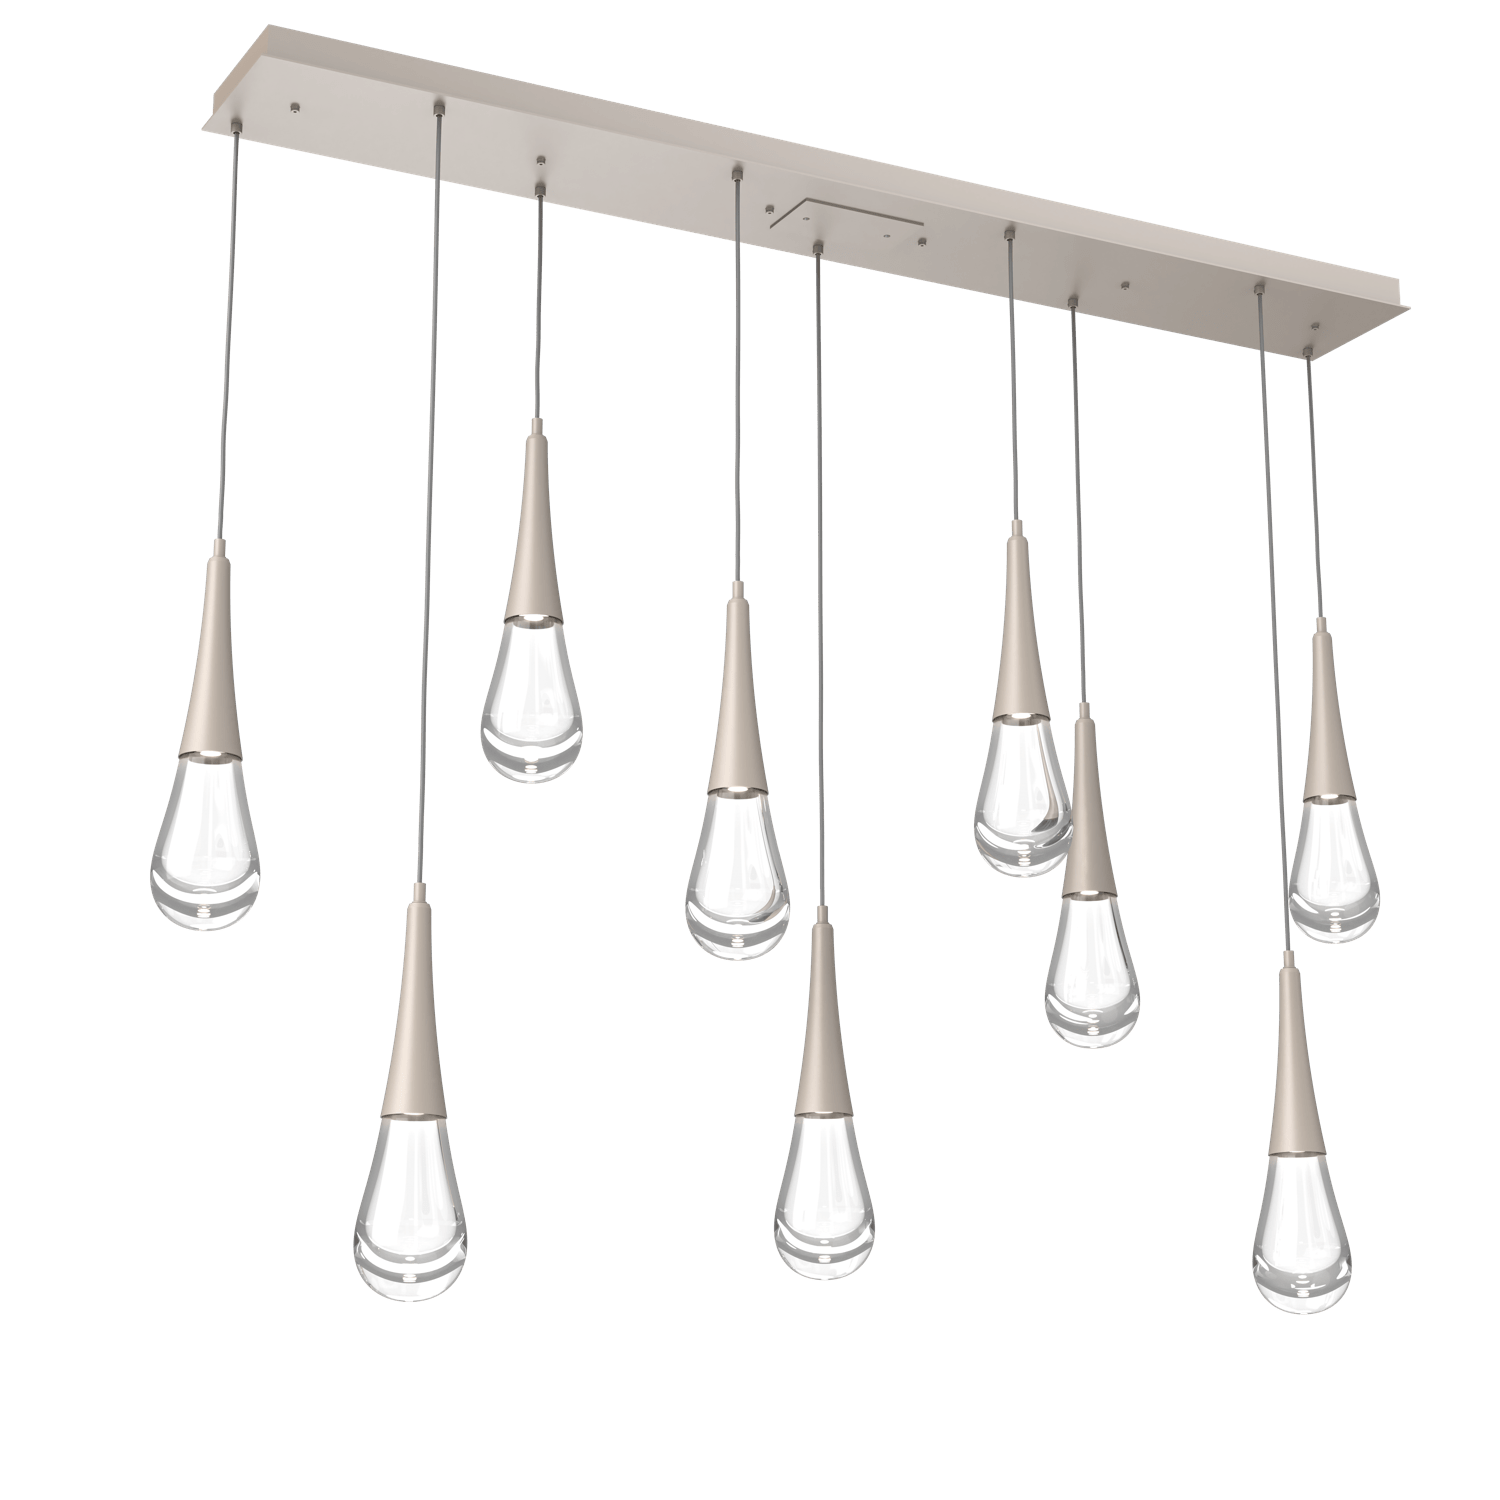 PLB0078-09-BS-Hammerton-Studio-Raindrop-9-light-linear-pendant-chandelier-with-metallic-beige-silver-finish-and-clear-blown-glass-shades-and-LED-lamping